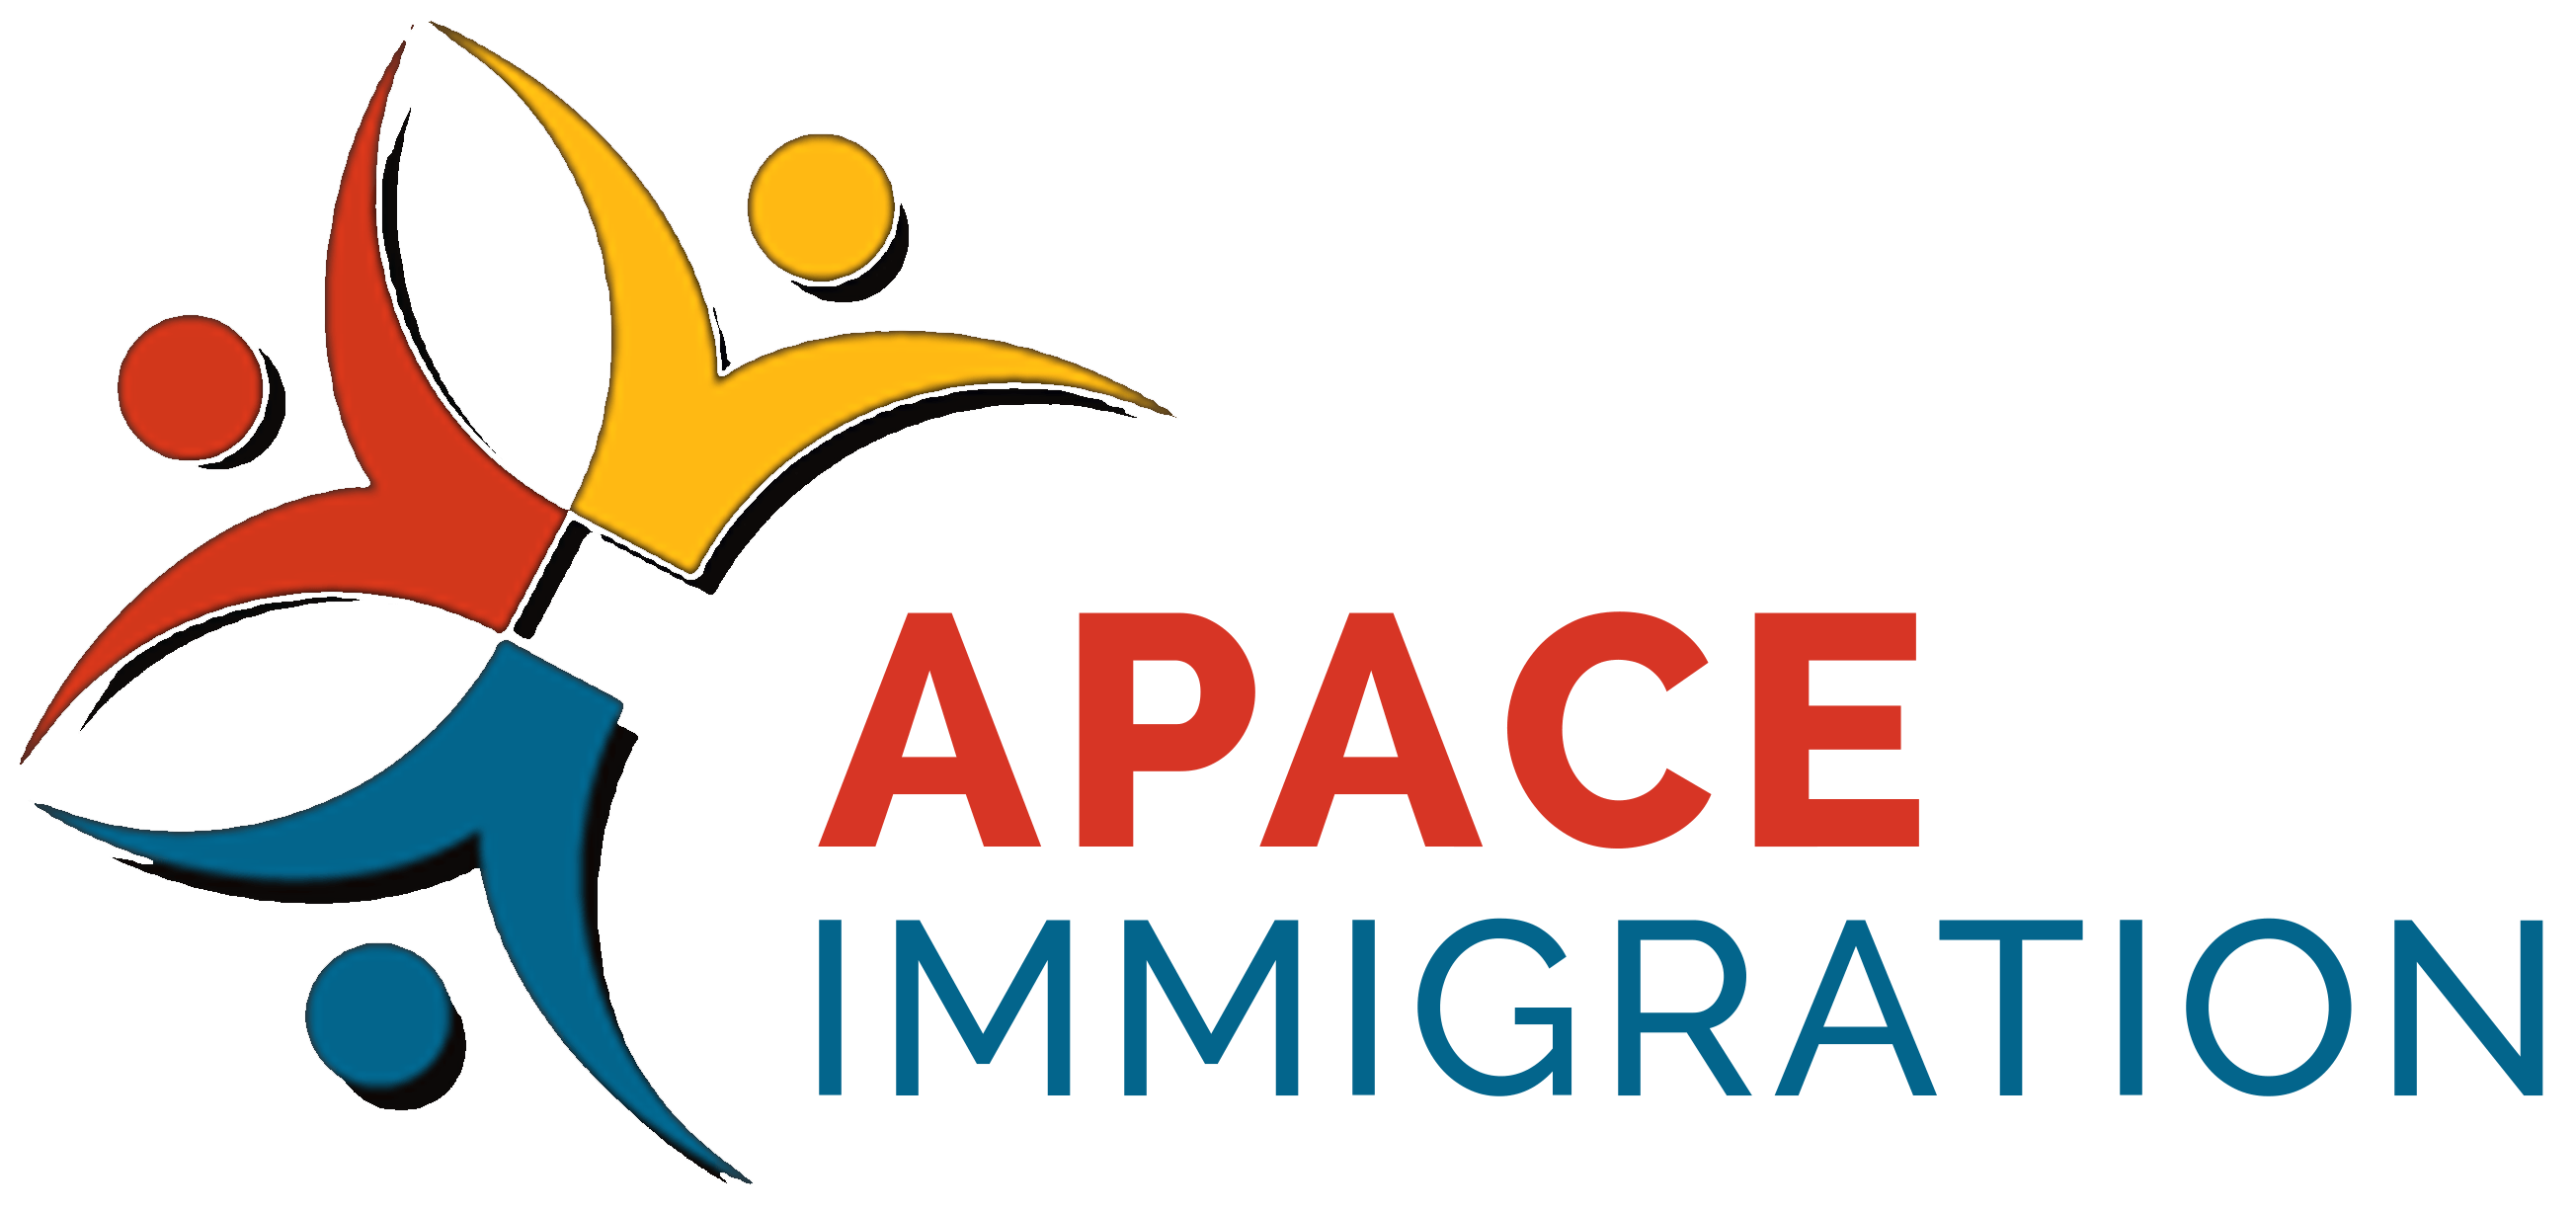 Immigration Logo - Apace Immigration Services